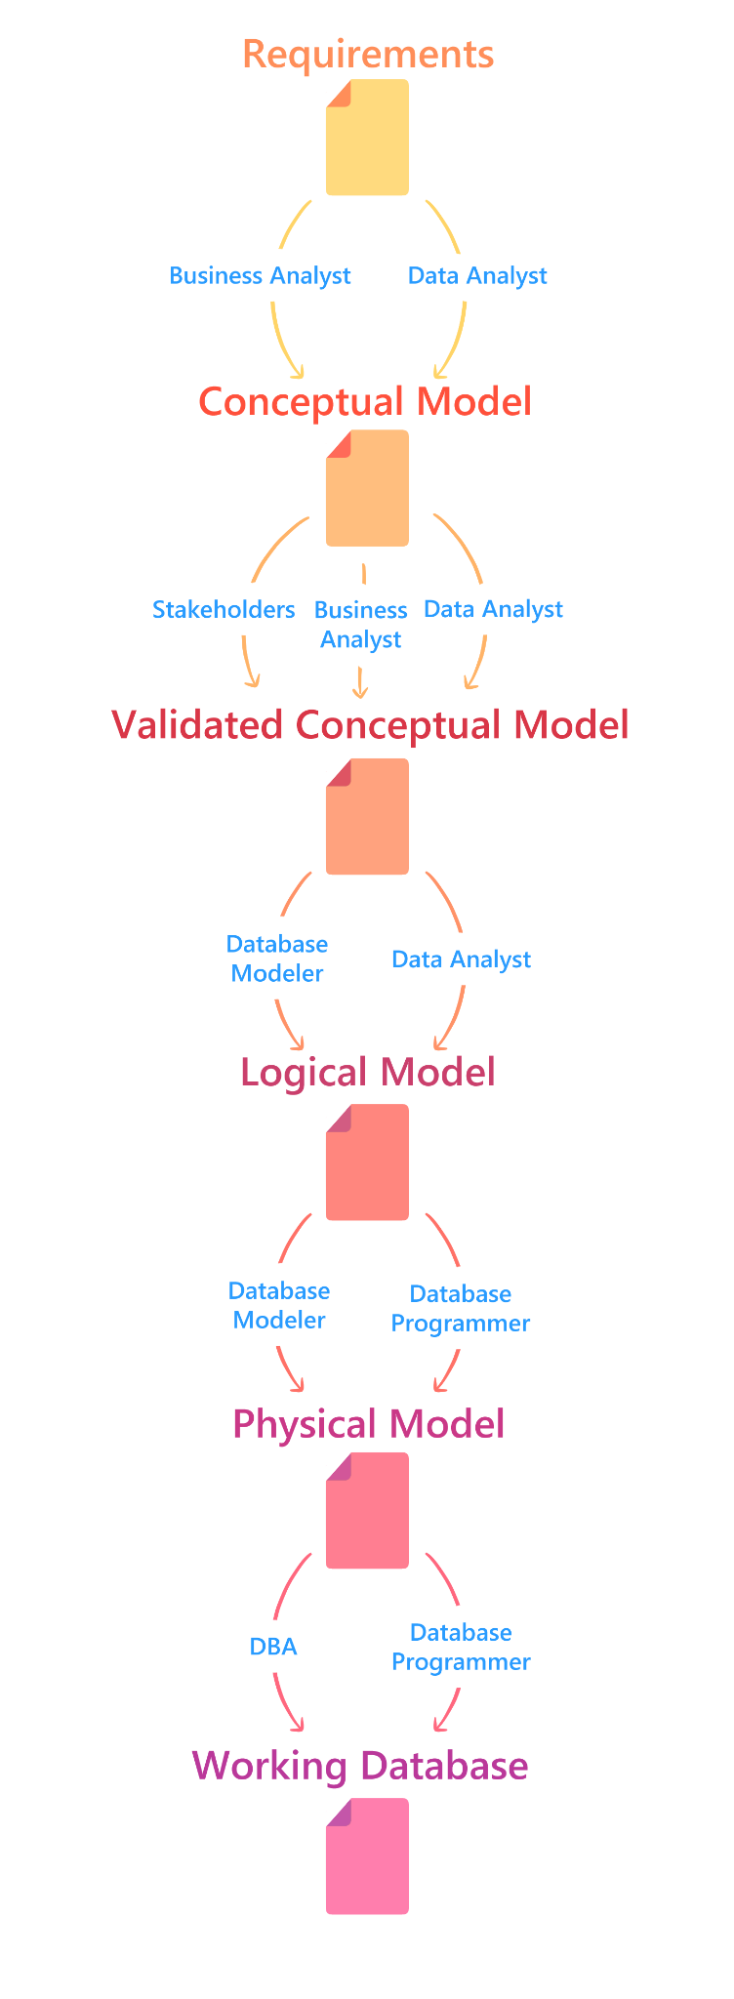 Why Your Company Needs a Database Modeling Tool